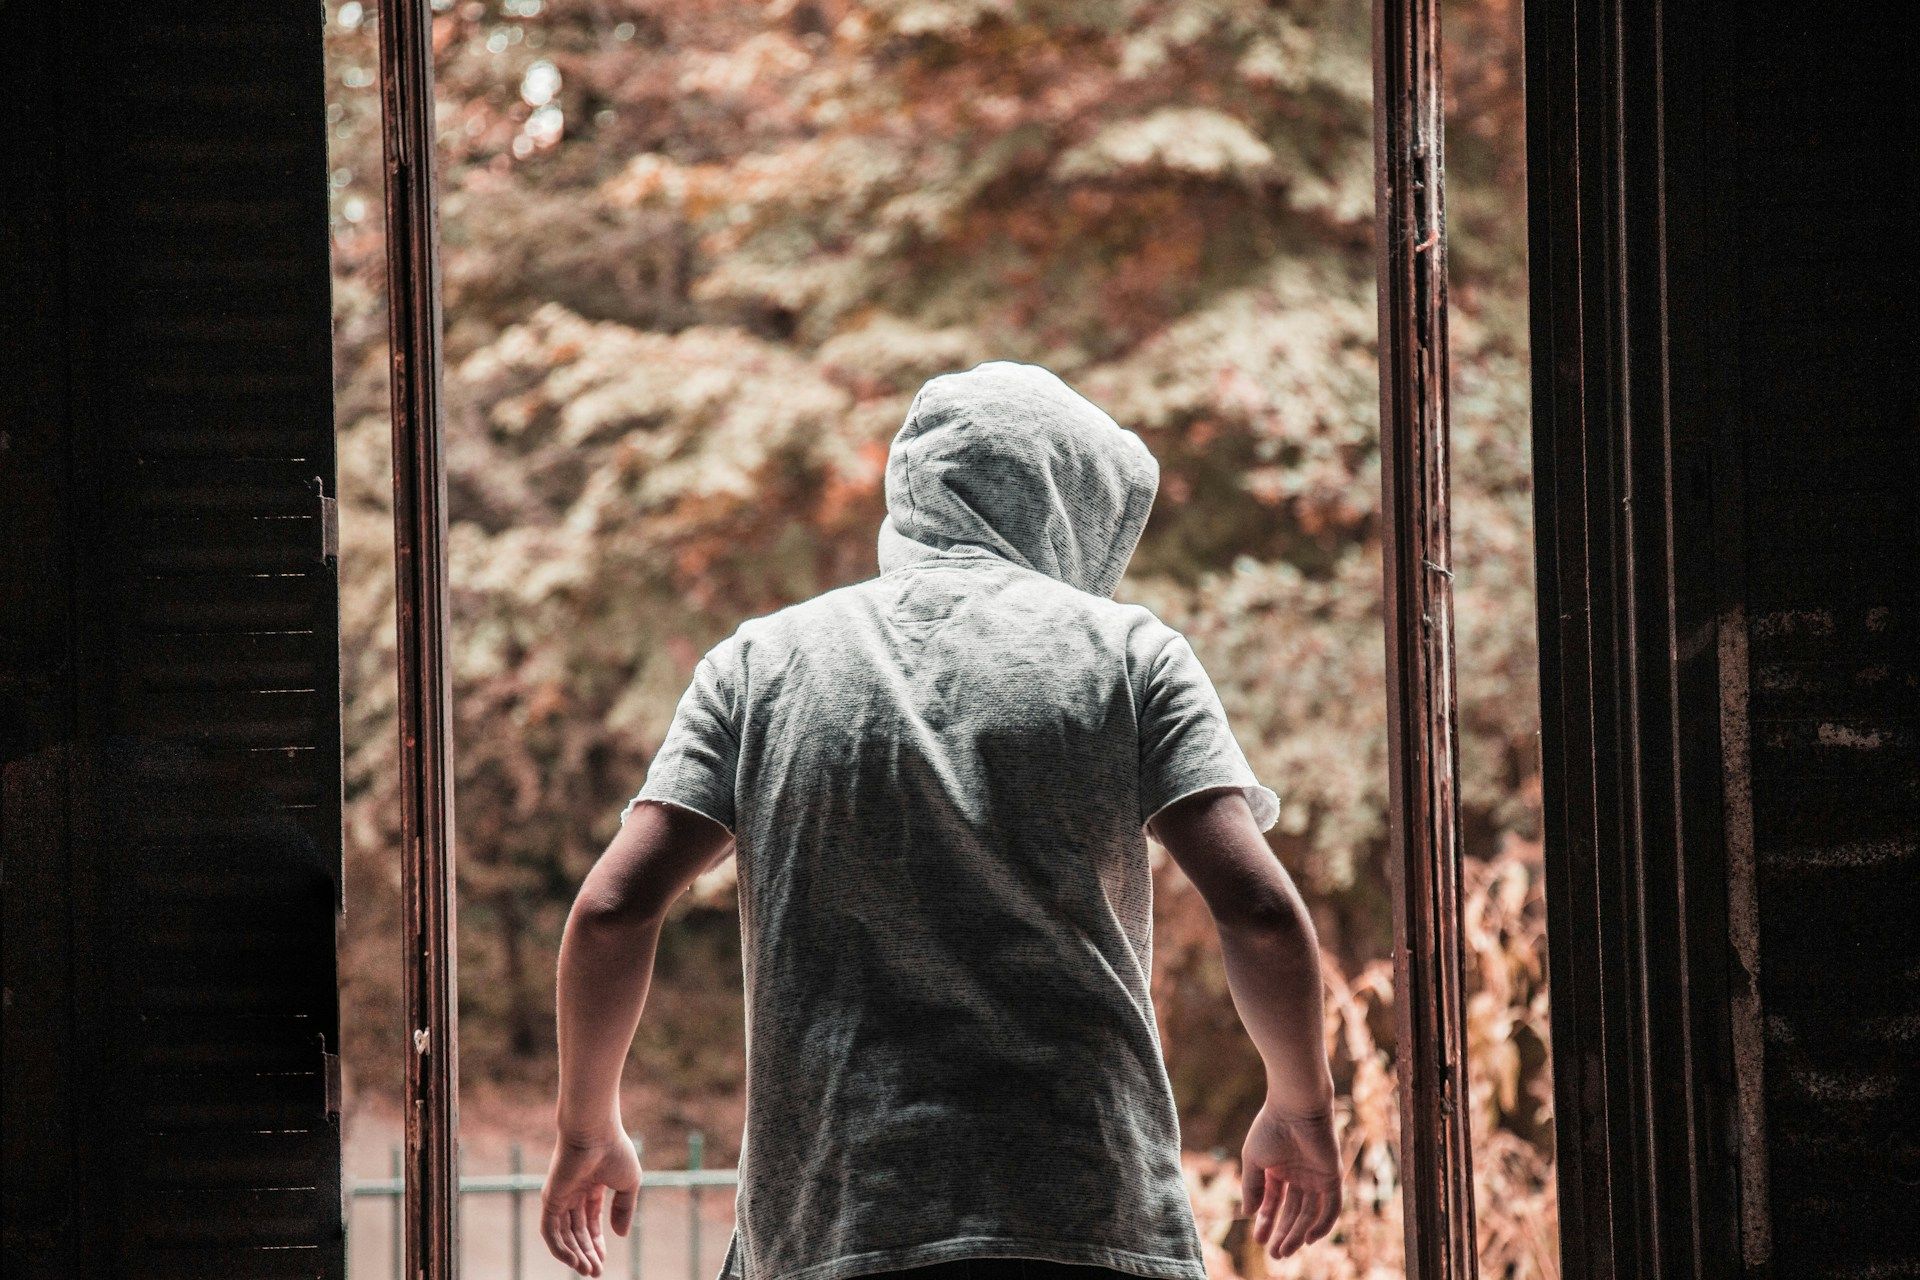 A man exiting a building in a grey hoodie